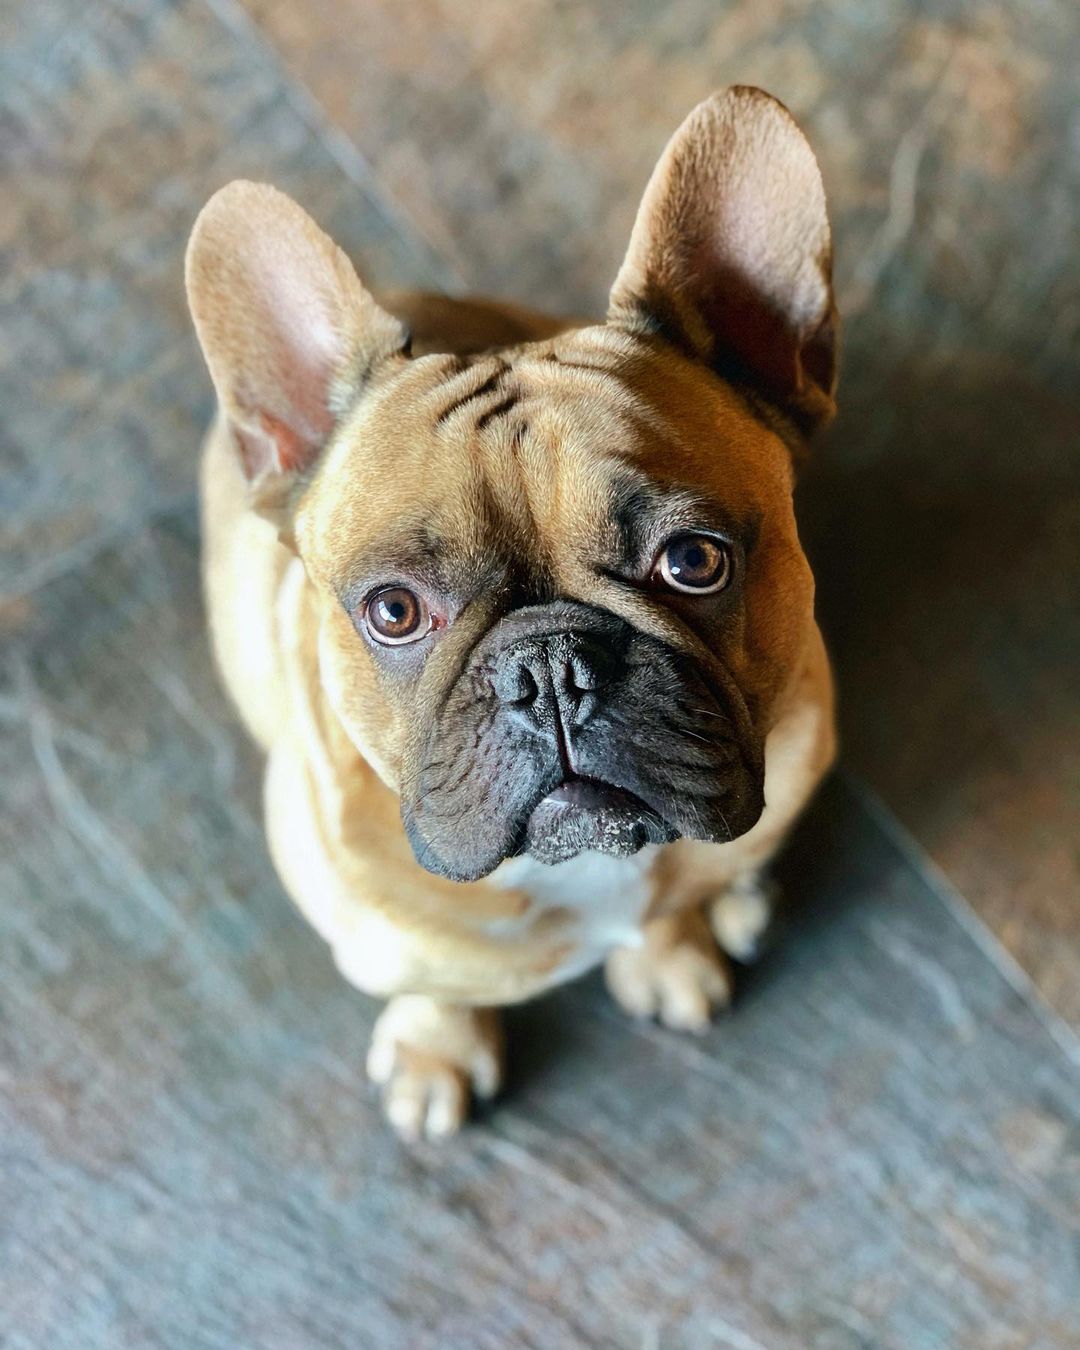 16 Cool Facts About French Bulldogs - Page 4 of 6 - BuzzSharer.com